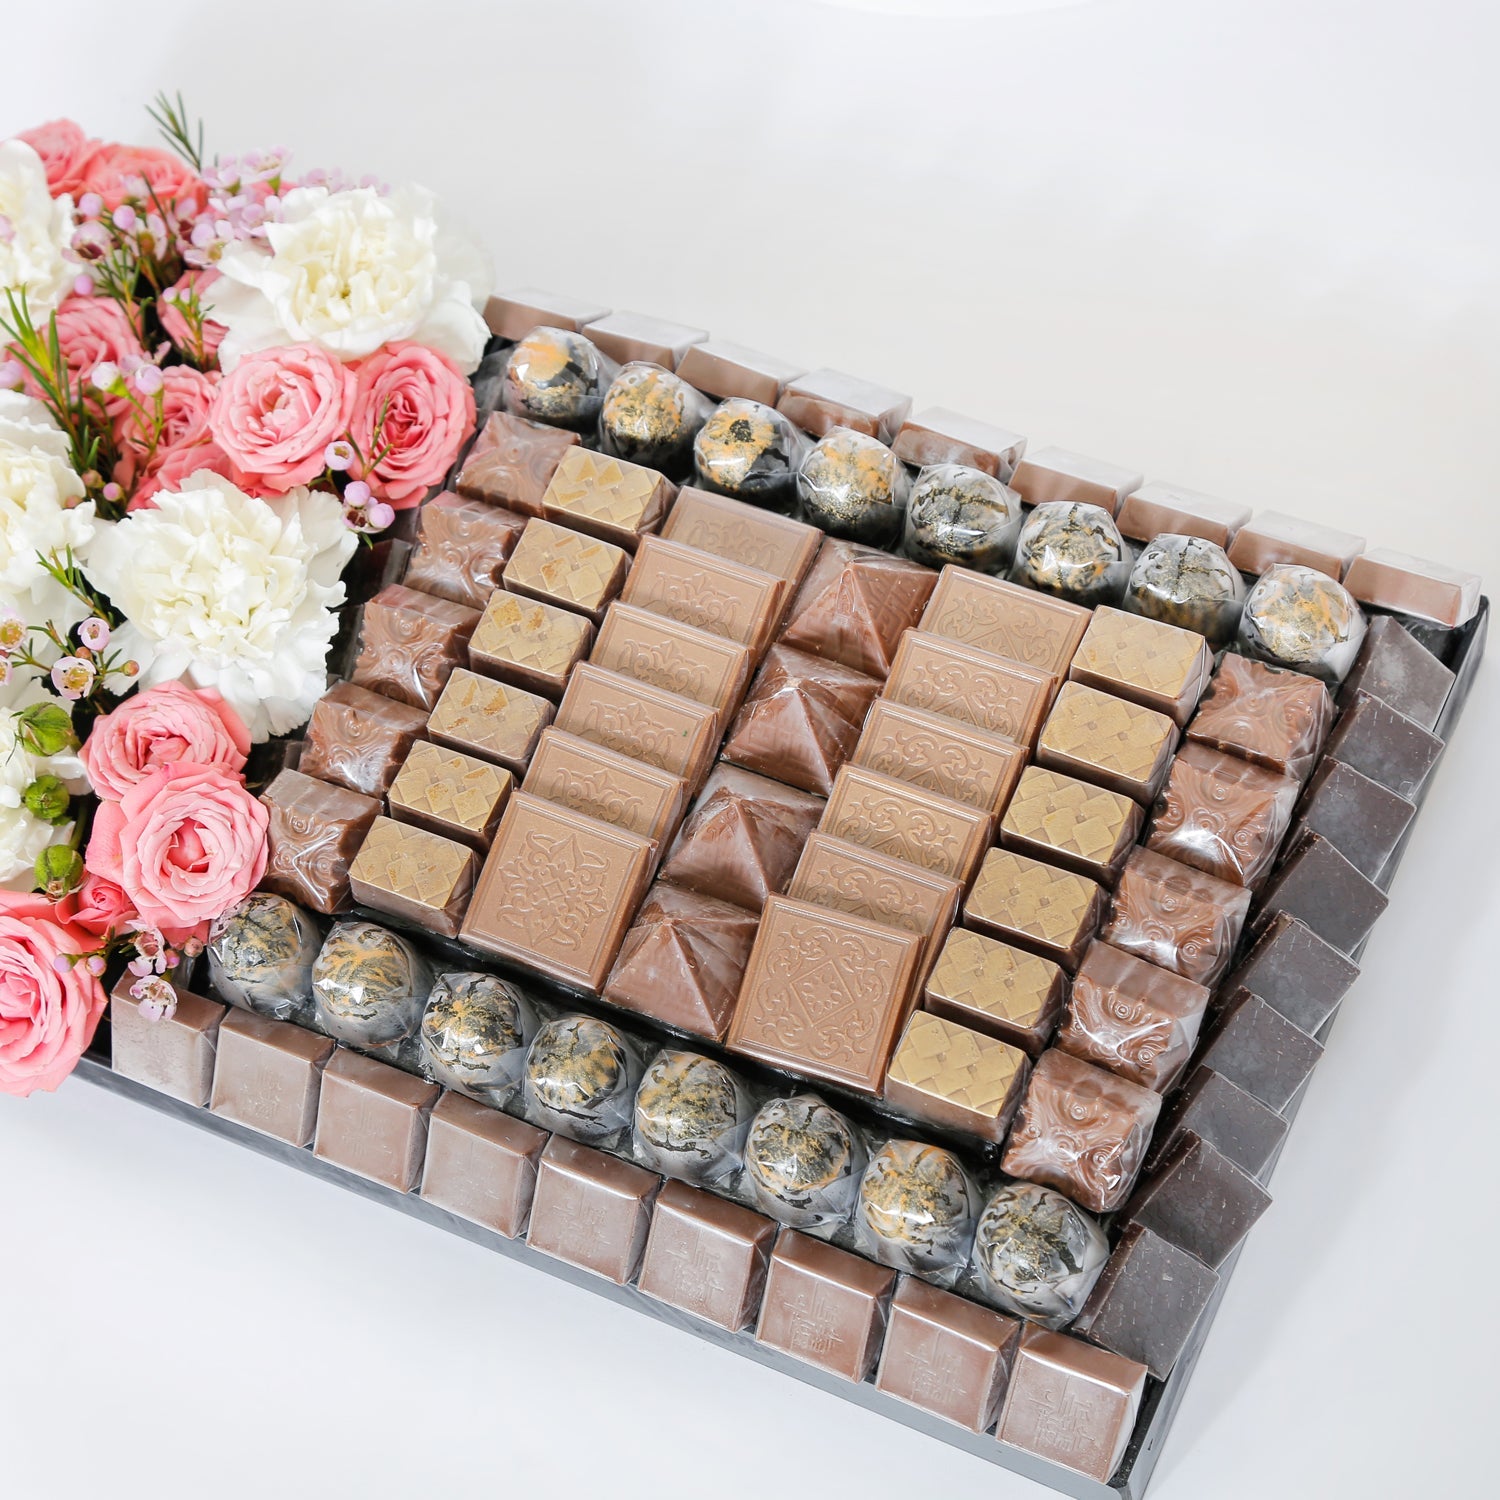 Eid Special Chocolate Tray From Opera Patisserie